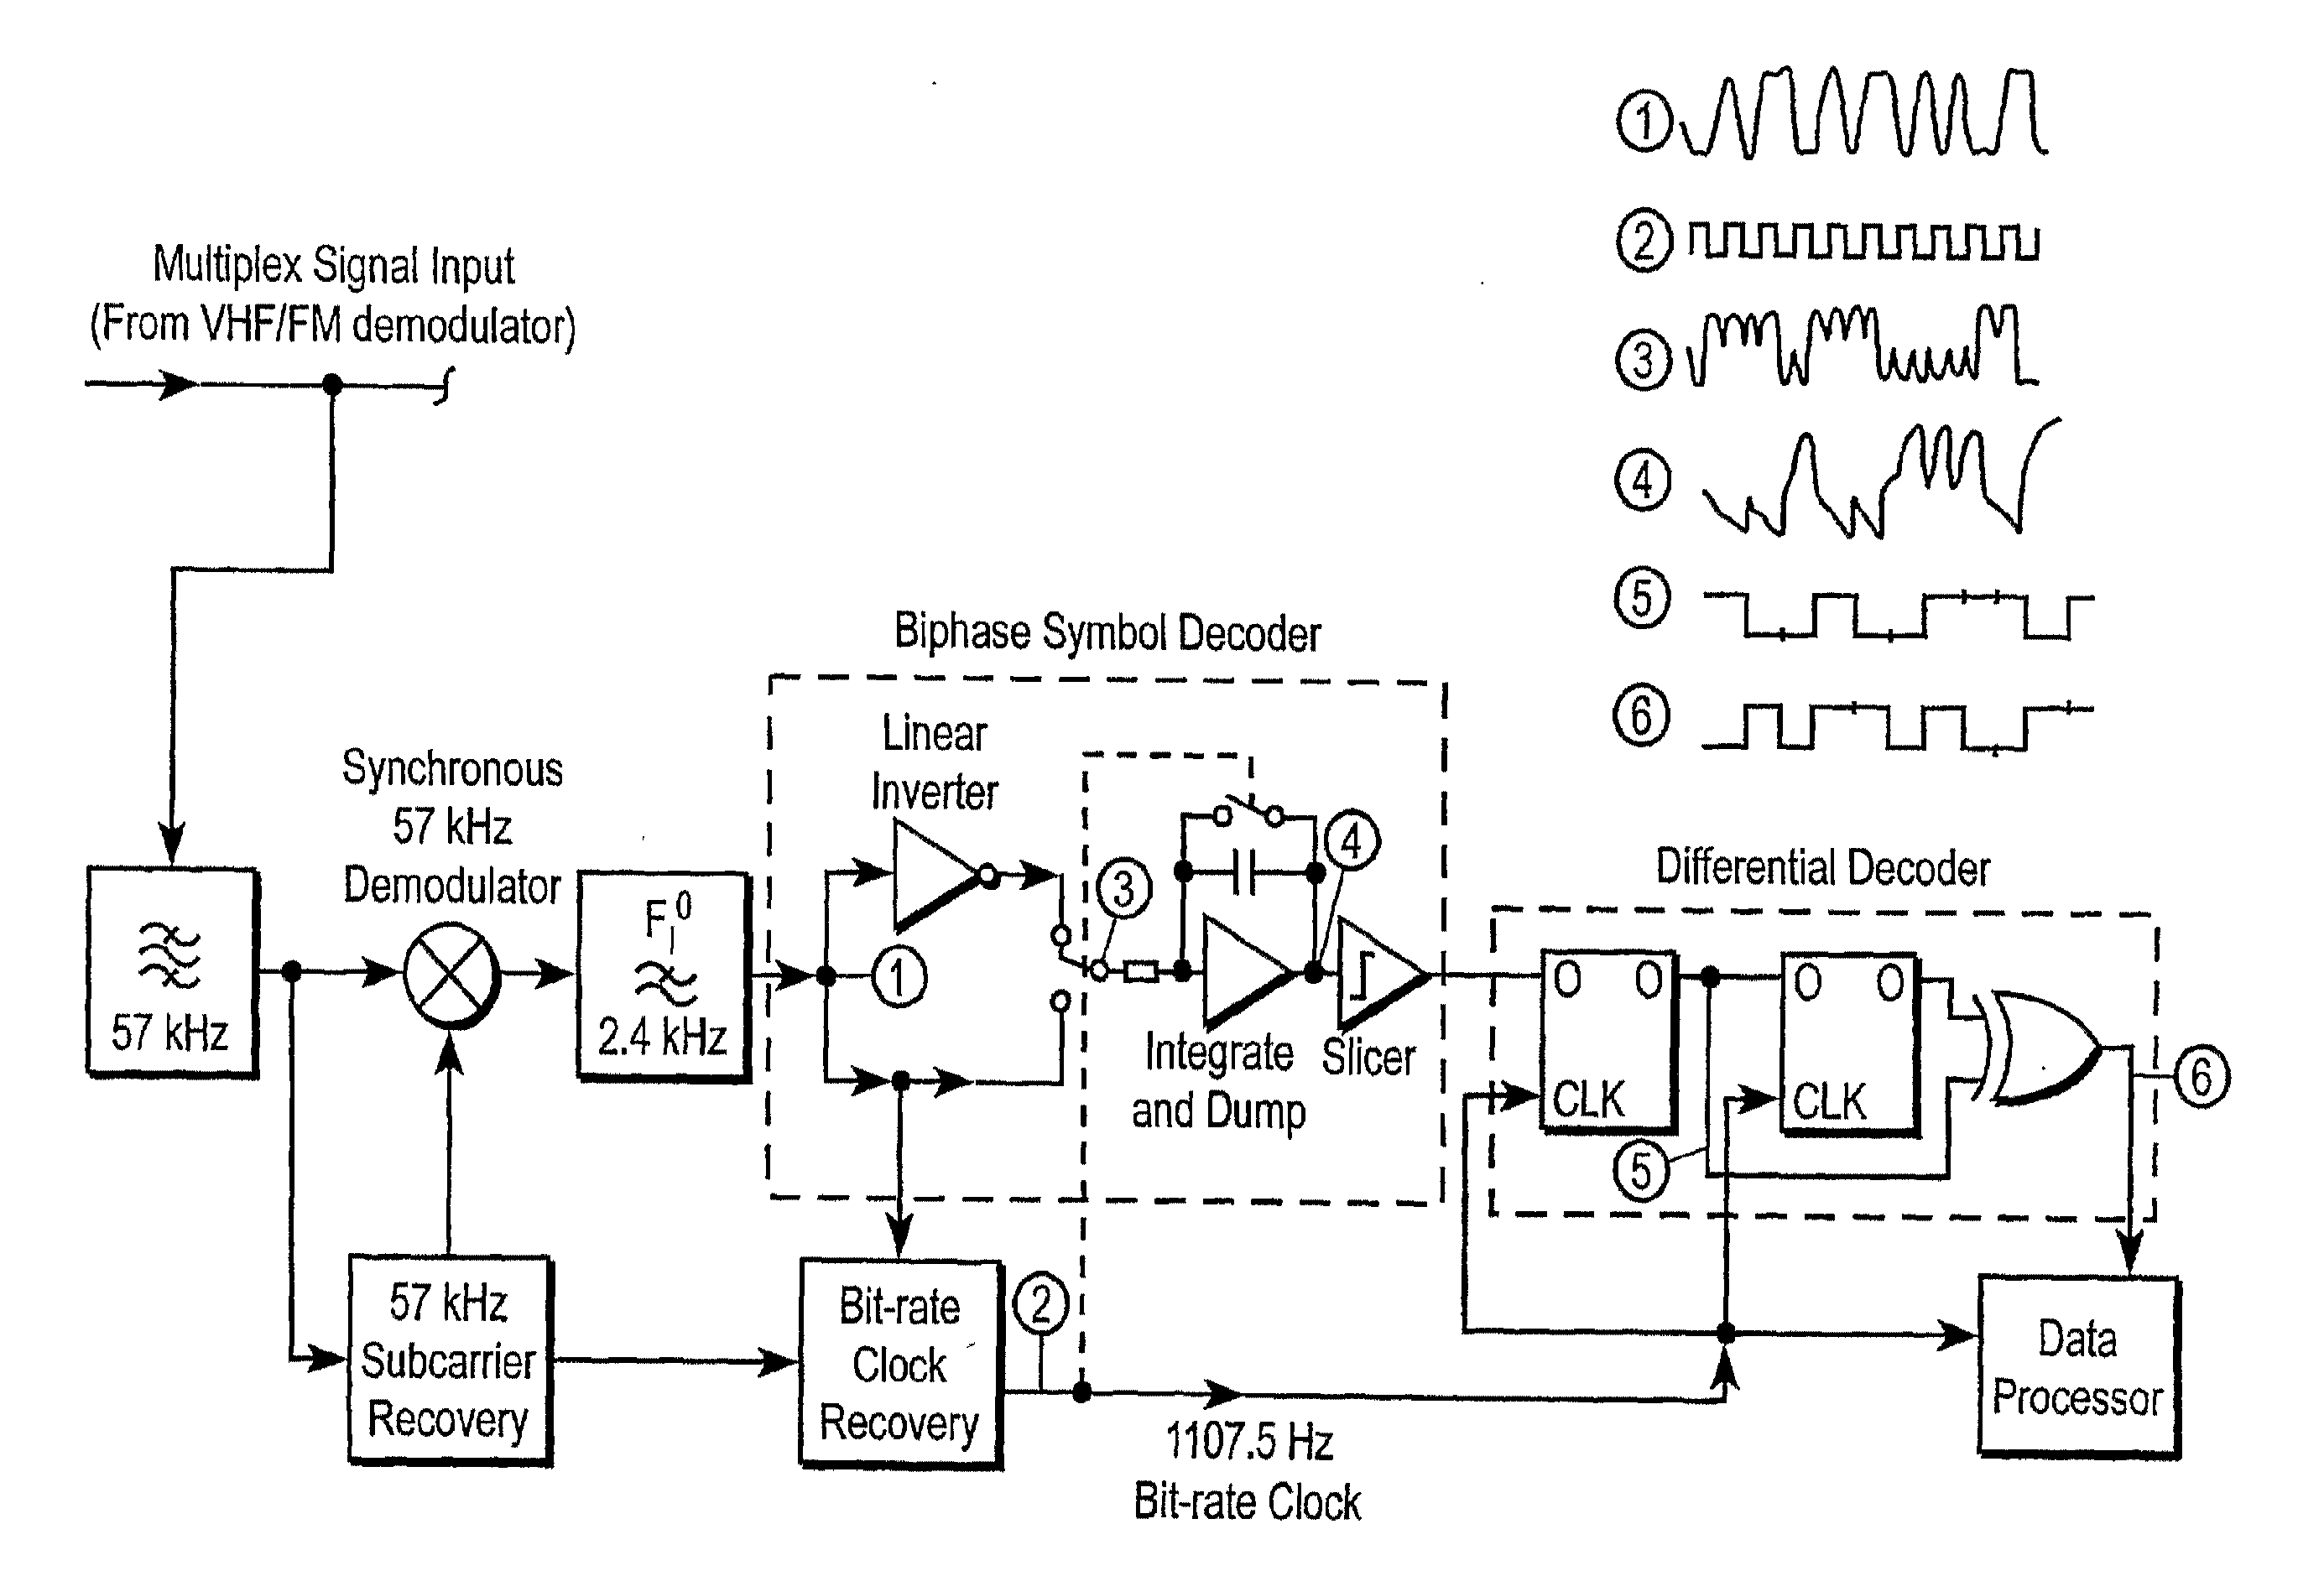 Systems and methods for modifying utility usage